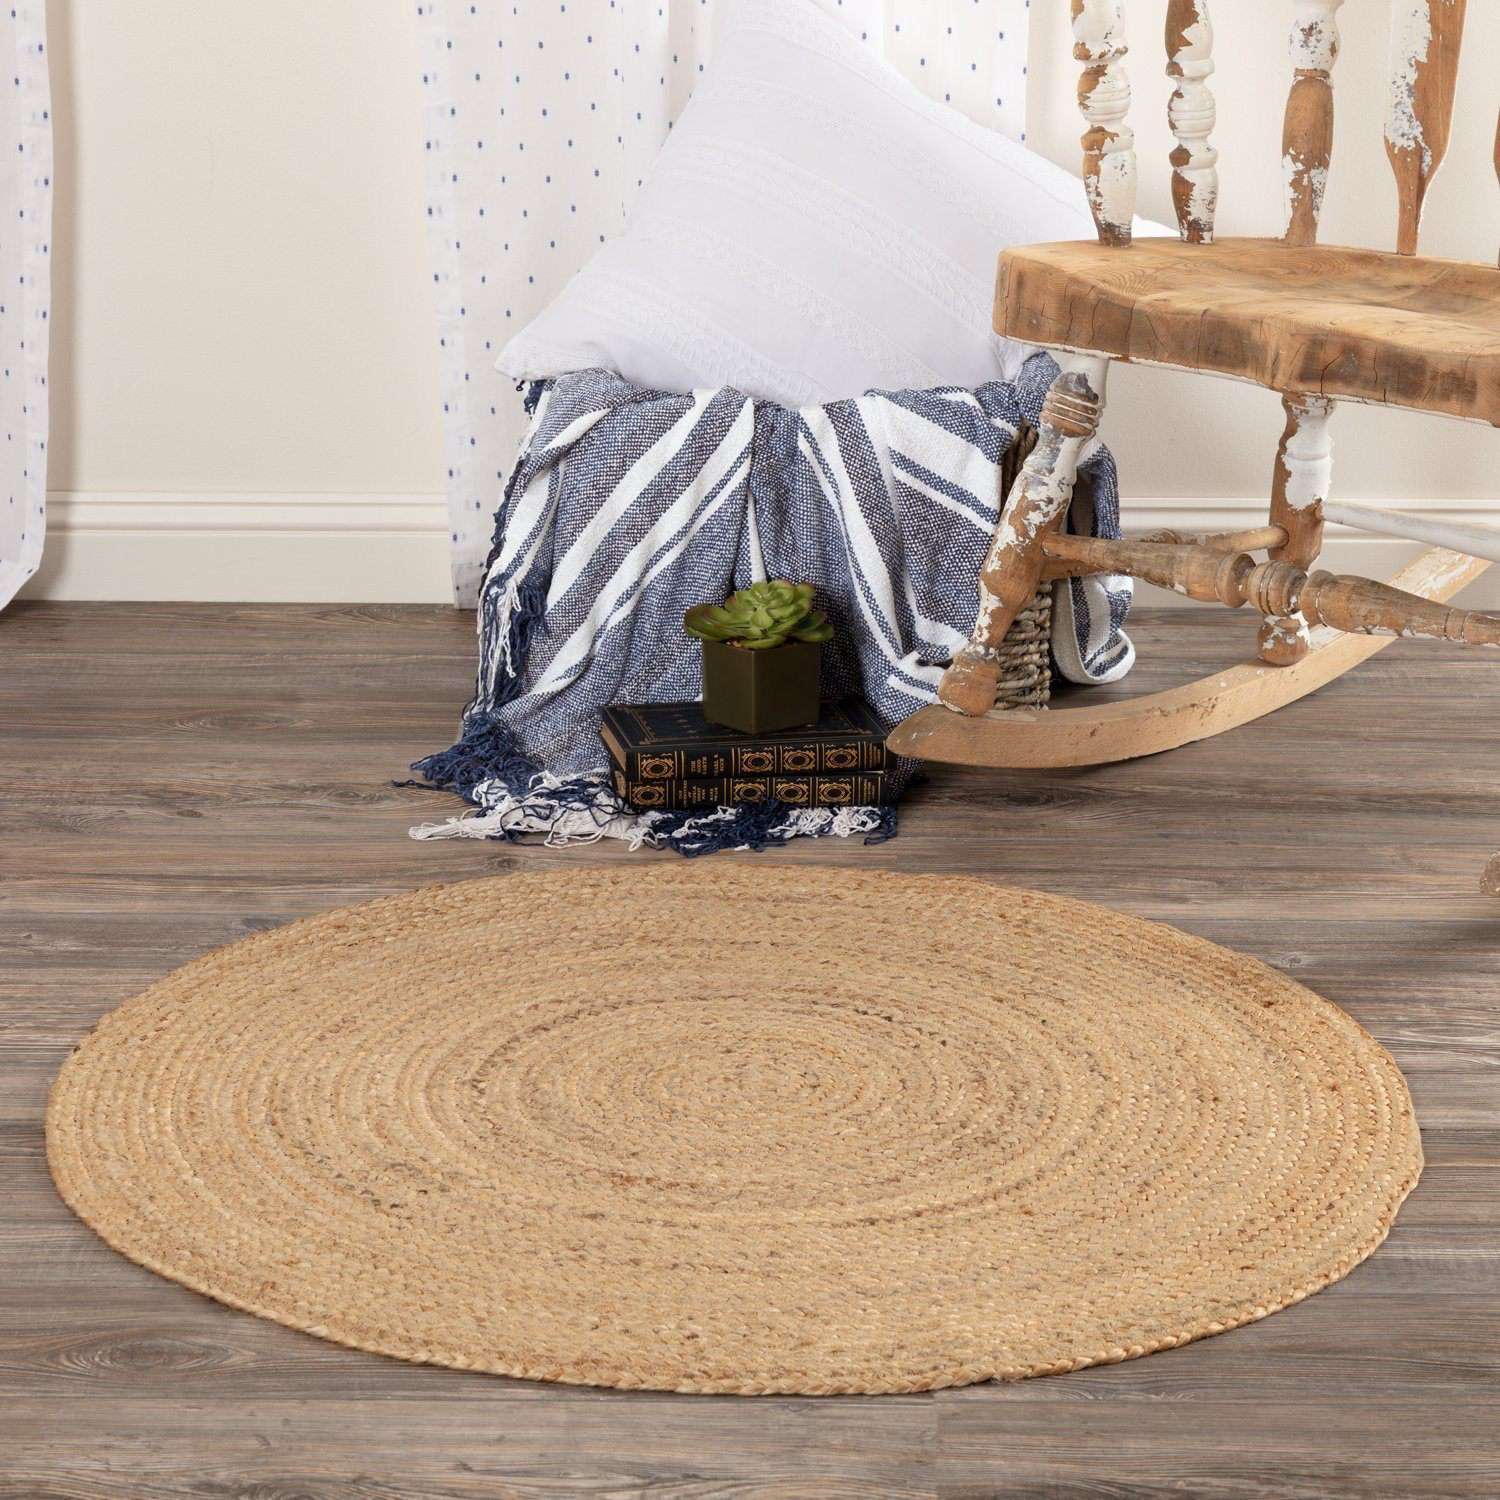 Harlow Jute Braided Round Rugs VHC Brands Rugs VHC Brands 3' FT 